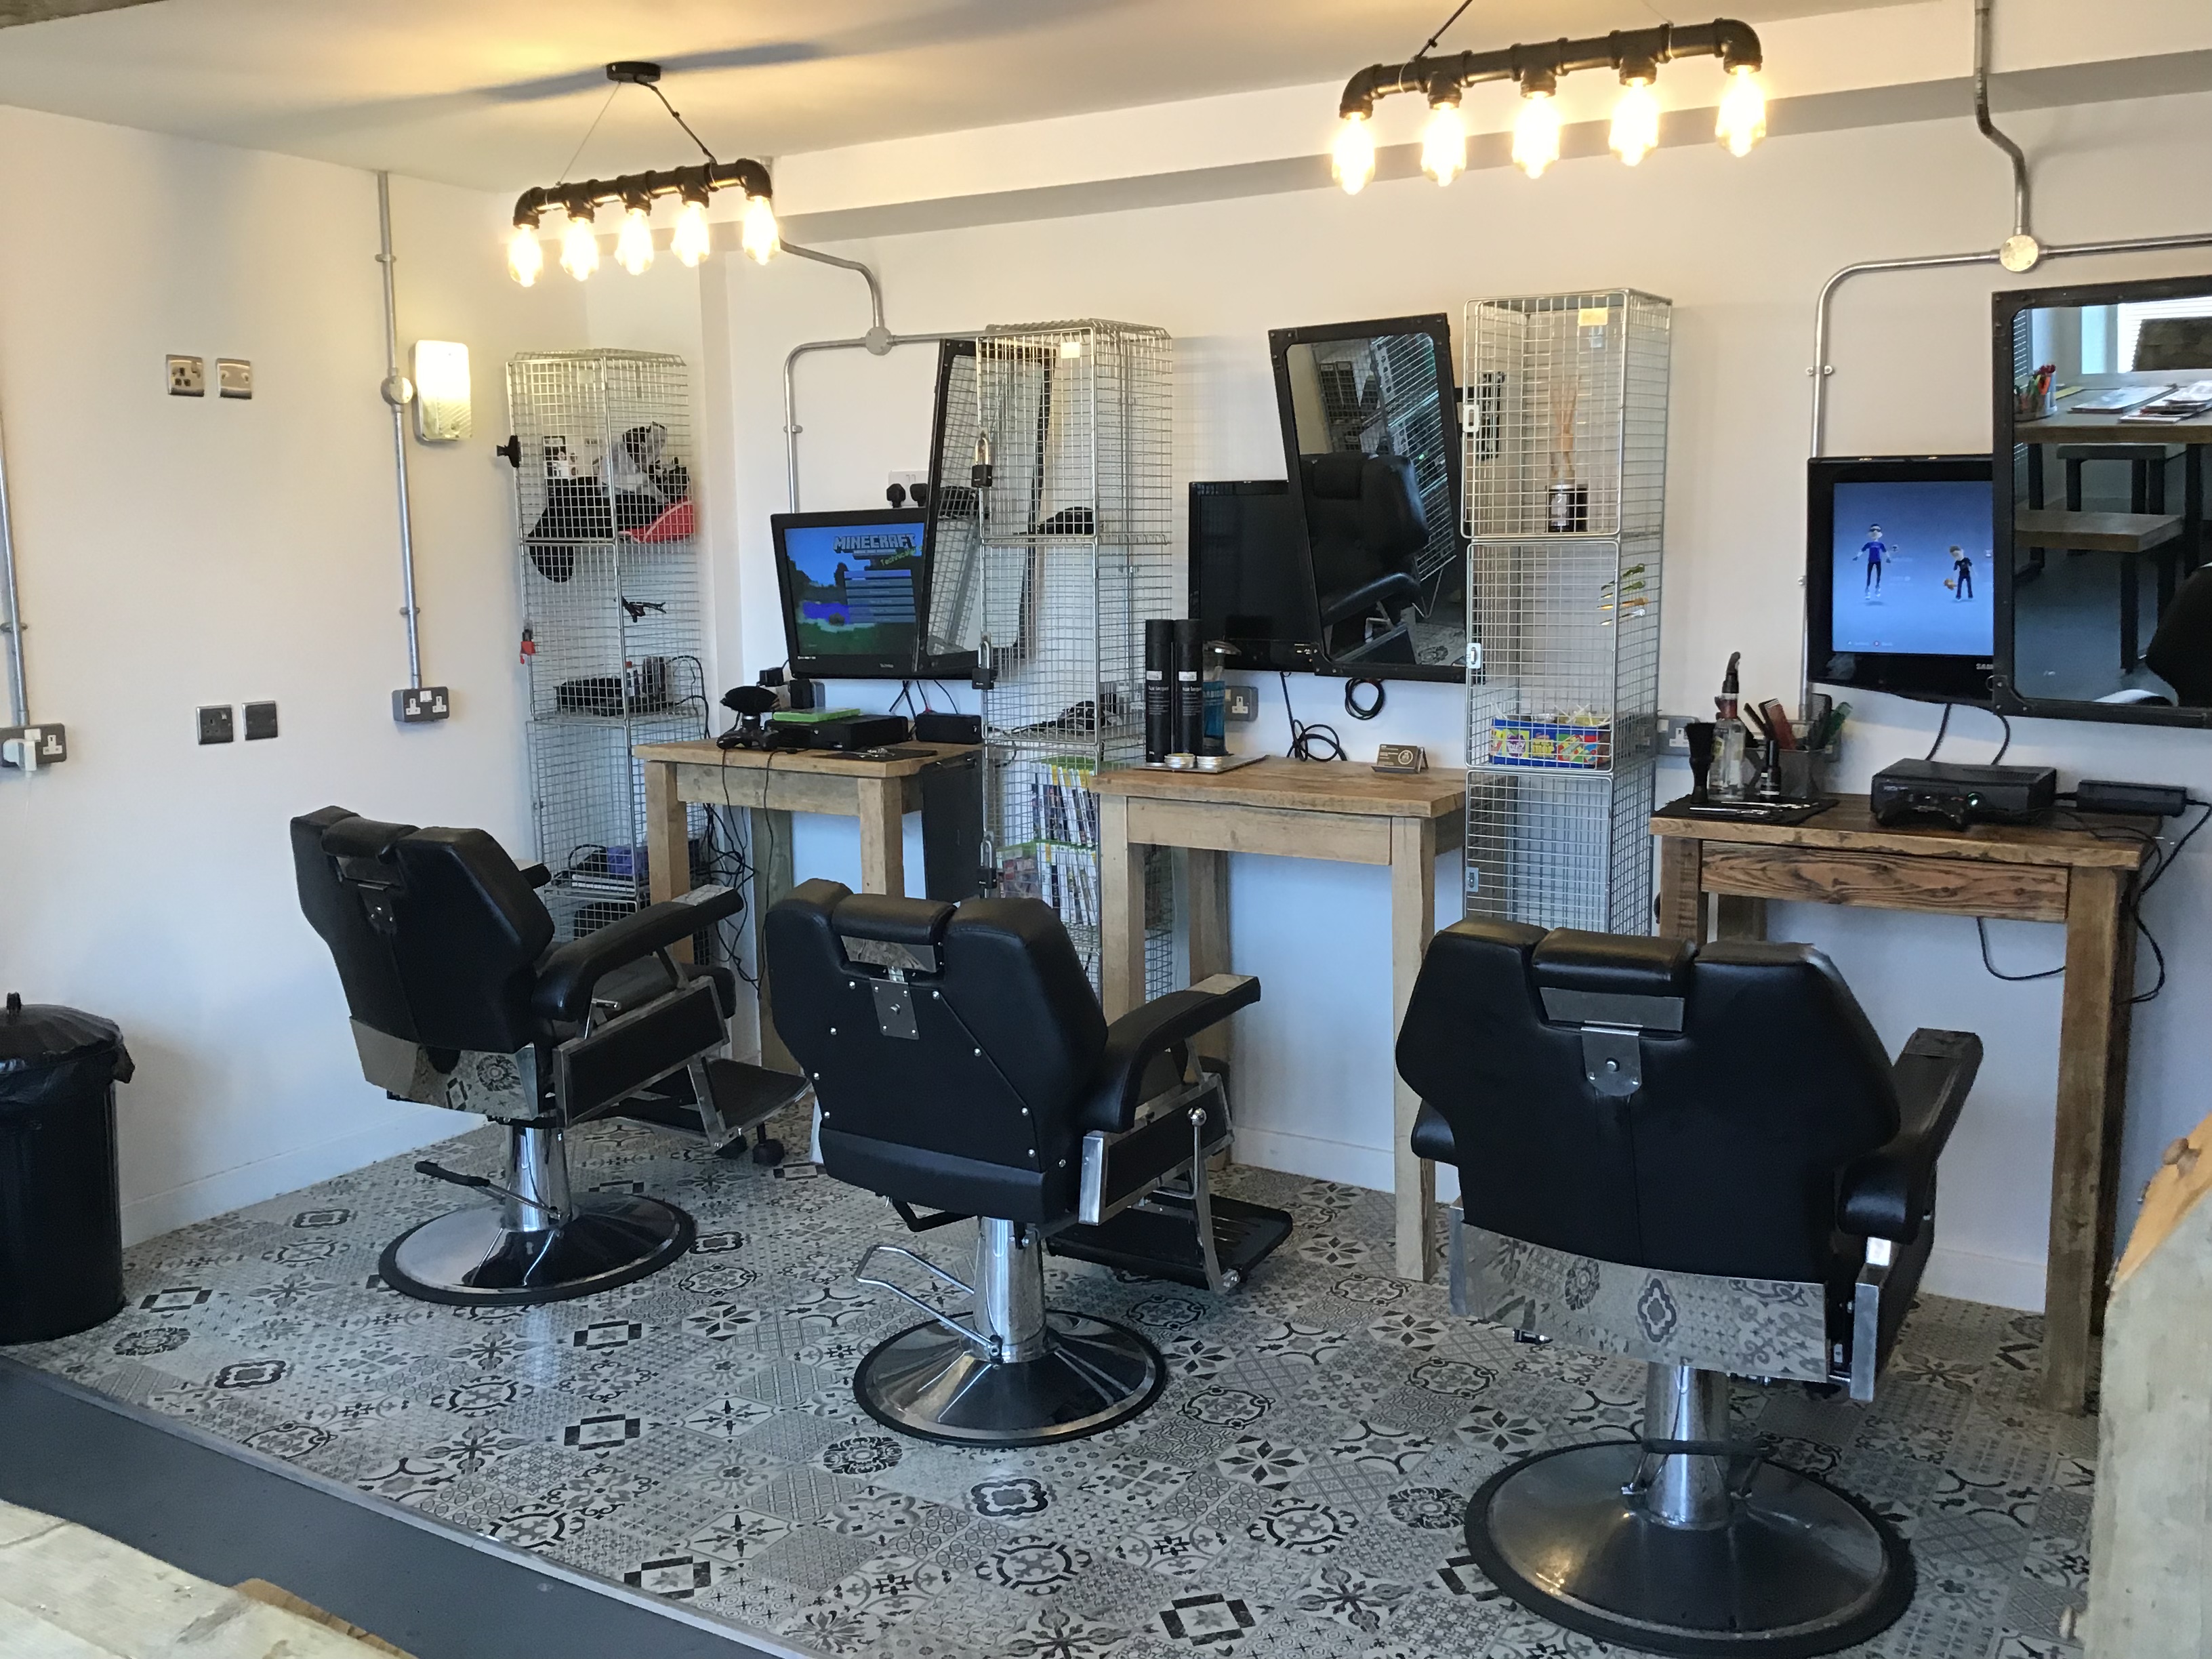 The barber chairs with xbox consoles to play